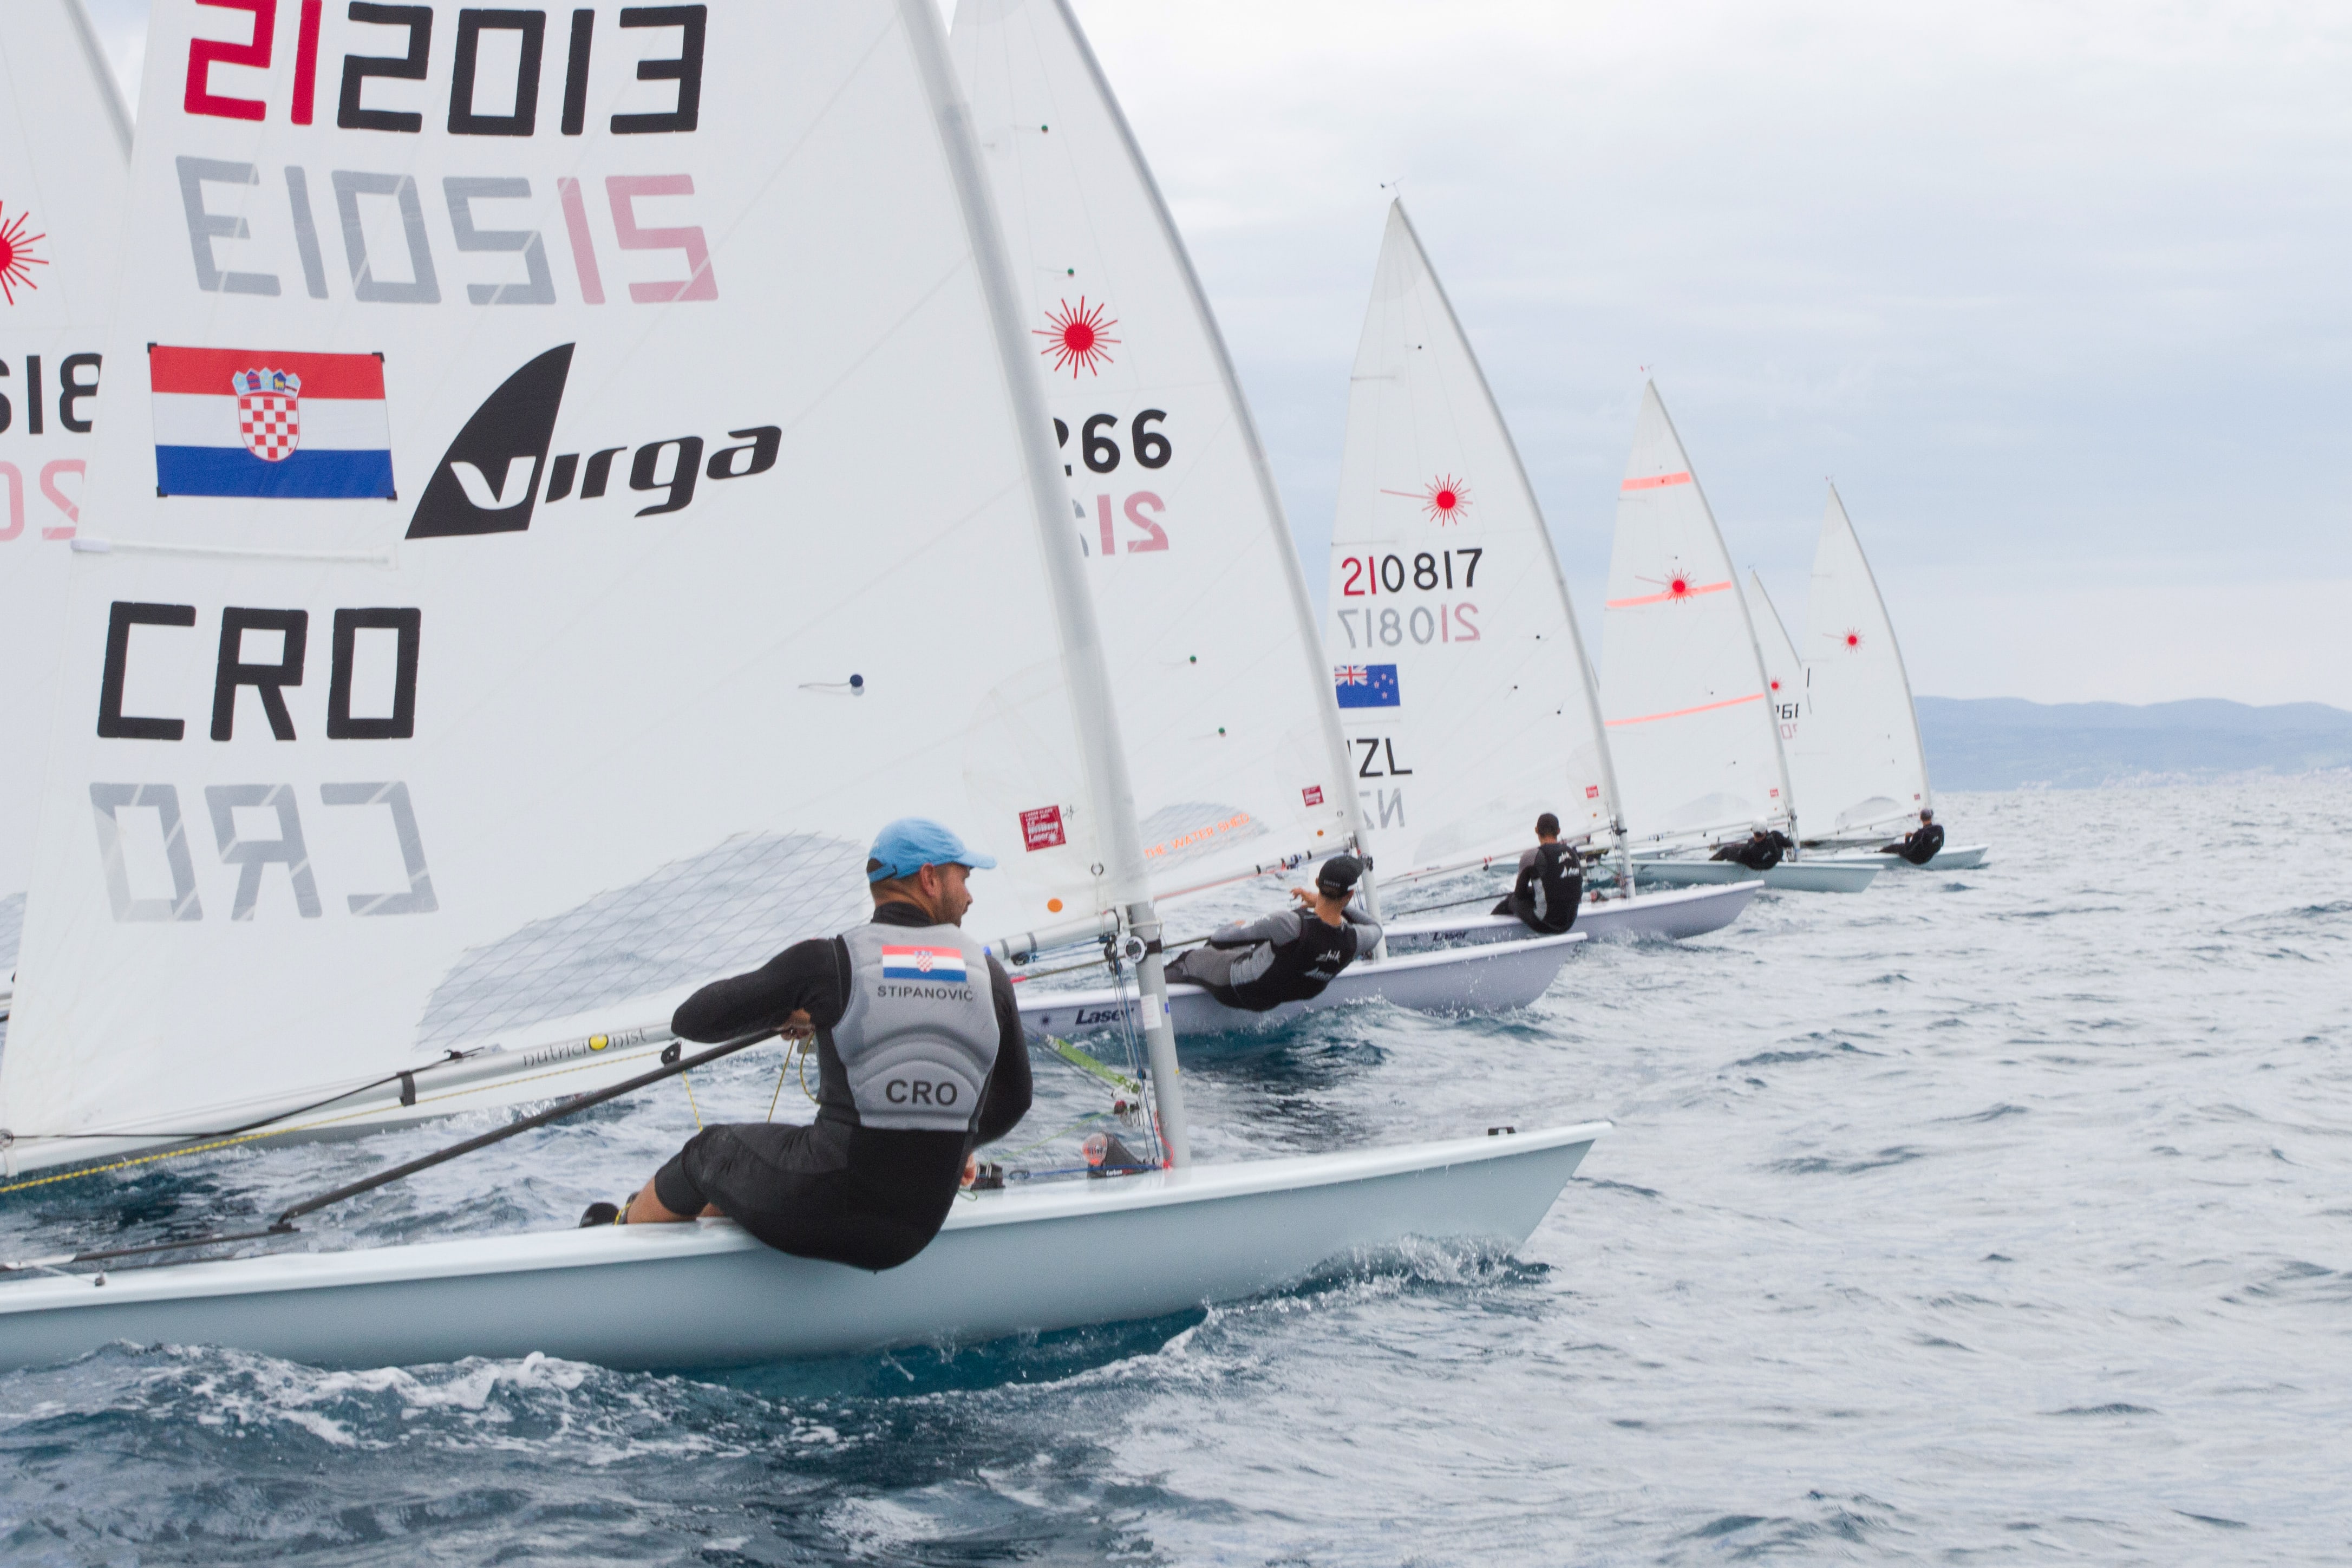  Laser Standard  World Championship 2017  Split CRO  Start today, with NorAm participants